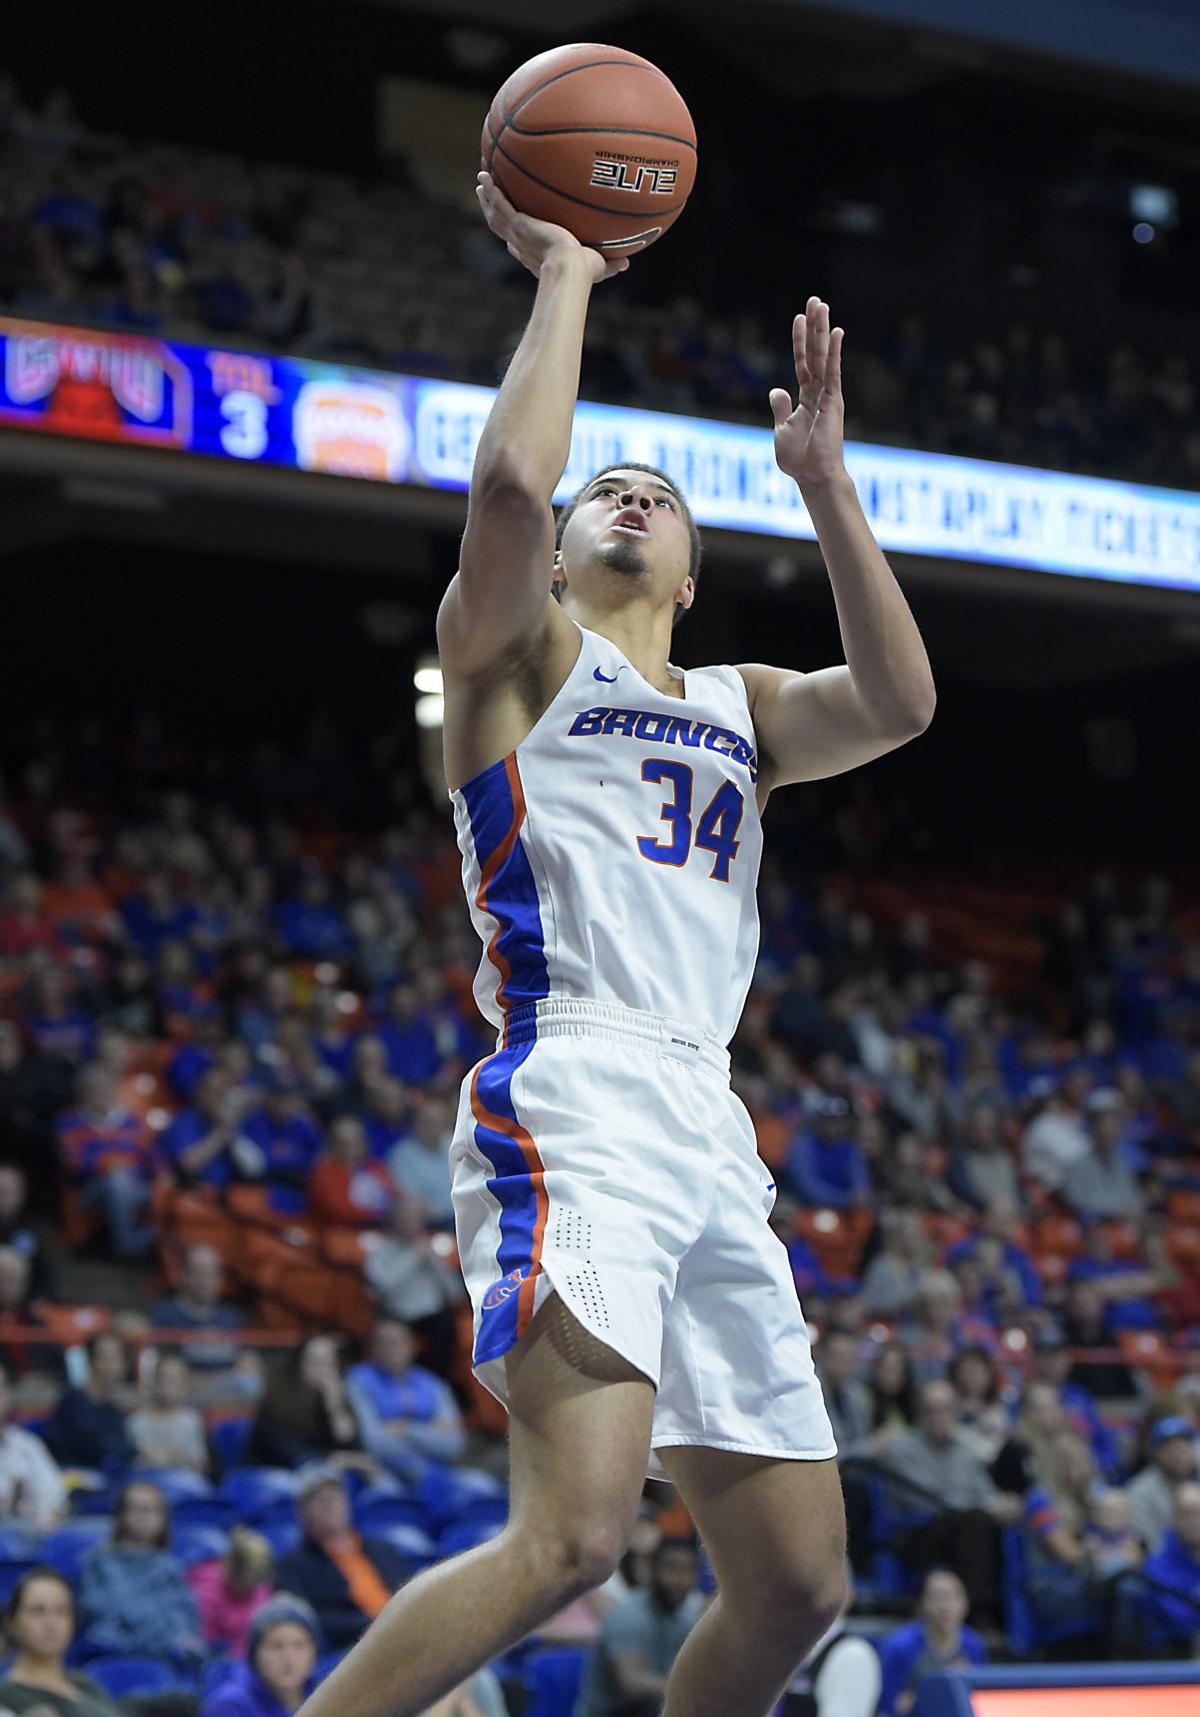 Healthy Alex Hobbs could be gamechanger for Boise State basketball